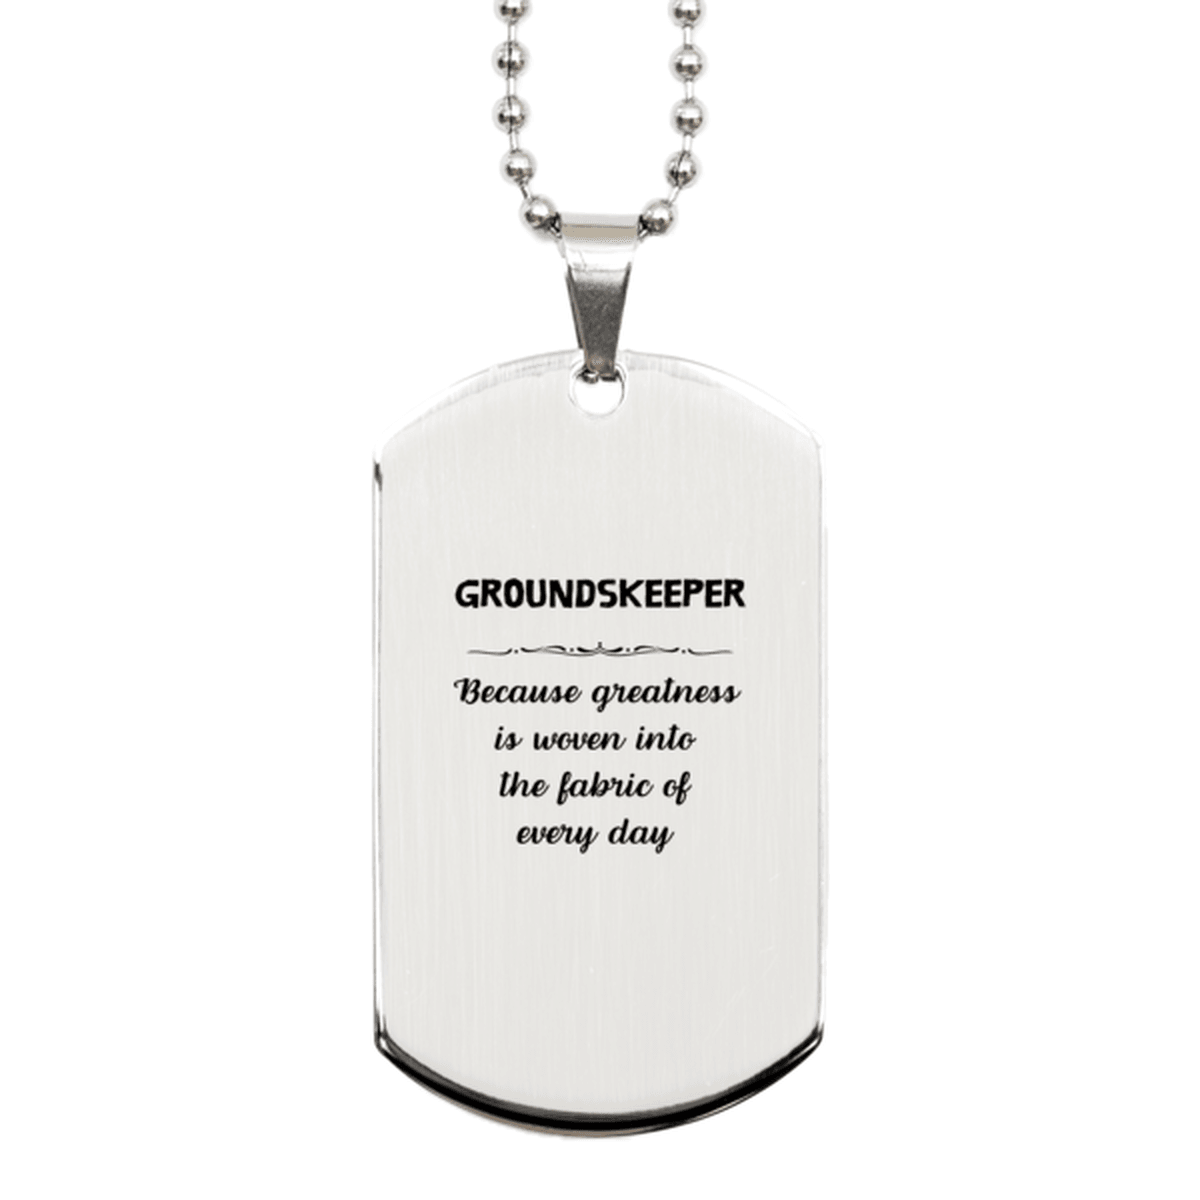 Sarcastic Groundskeeper Silver Dog Tag Gifts, Christmas Holiday Gifts for Groundskeeper Birthday, Groundskeeper: Because greatness is woven into the fabric of every day, Coworkers, Friends - Mallard Moon Gift Shop